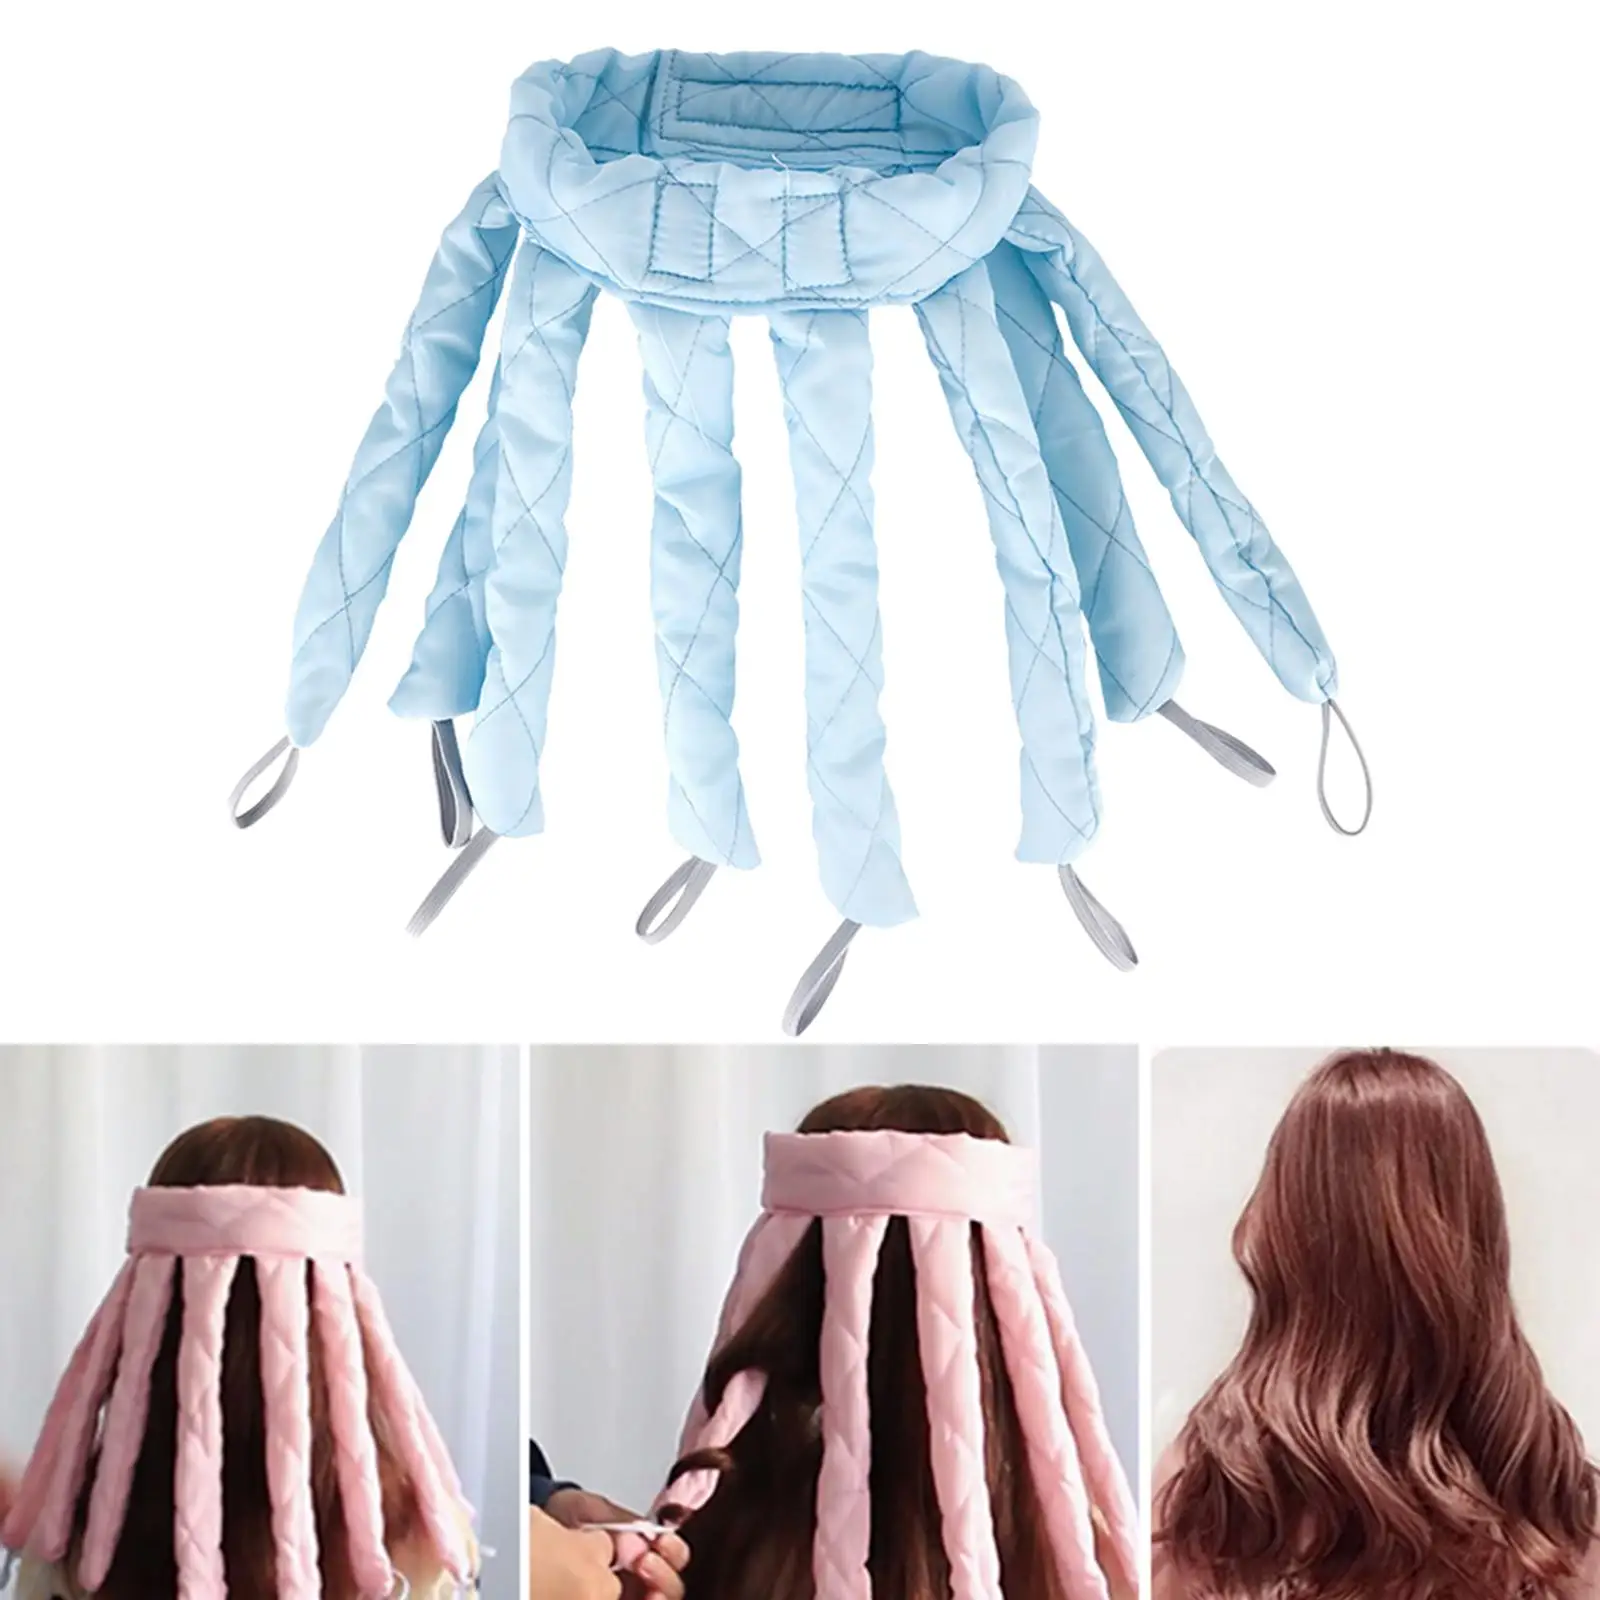 Octopus Design Heatless Hair Curlers Non-Damaging Hair Hair Styling Tool No Heat Curling Rod Headband Lazy Curlers Natural Curls